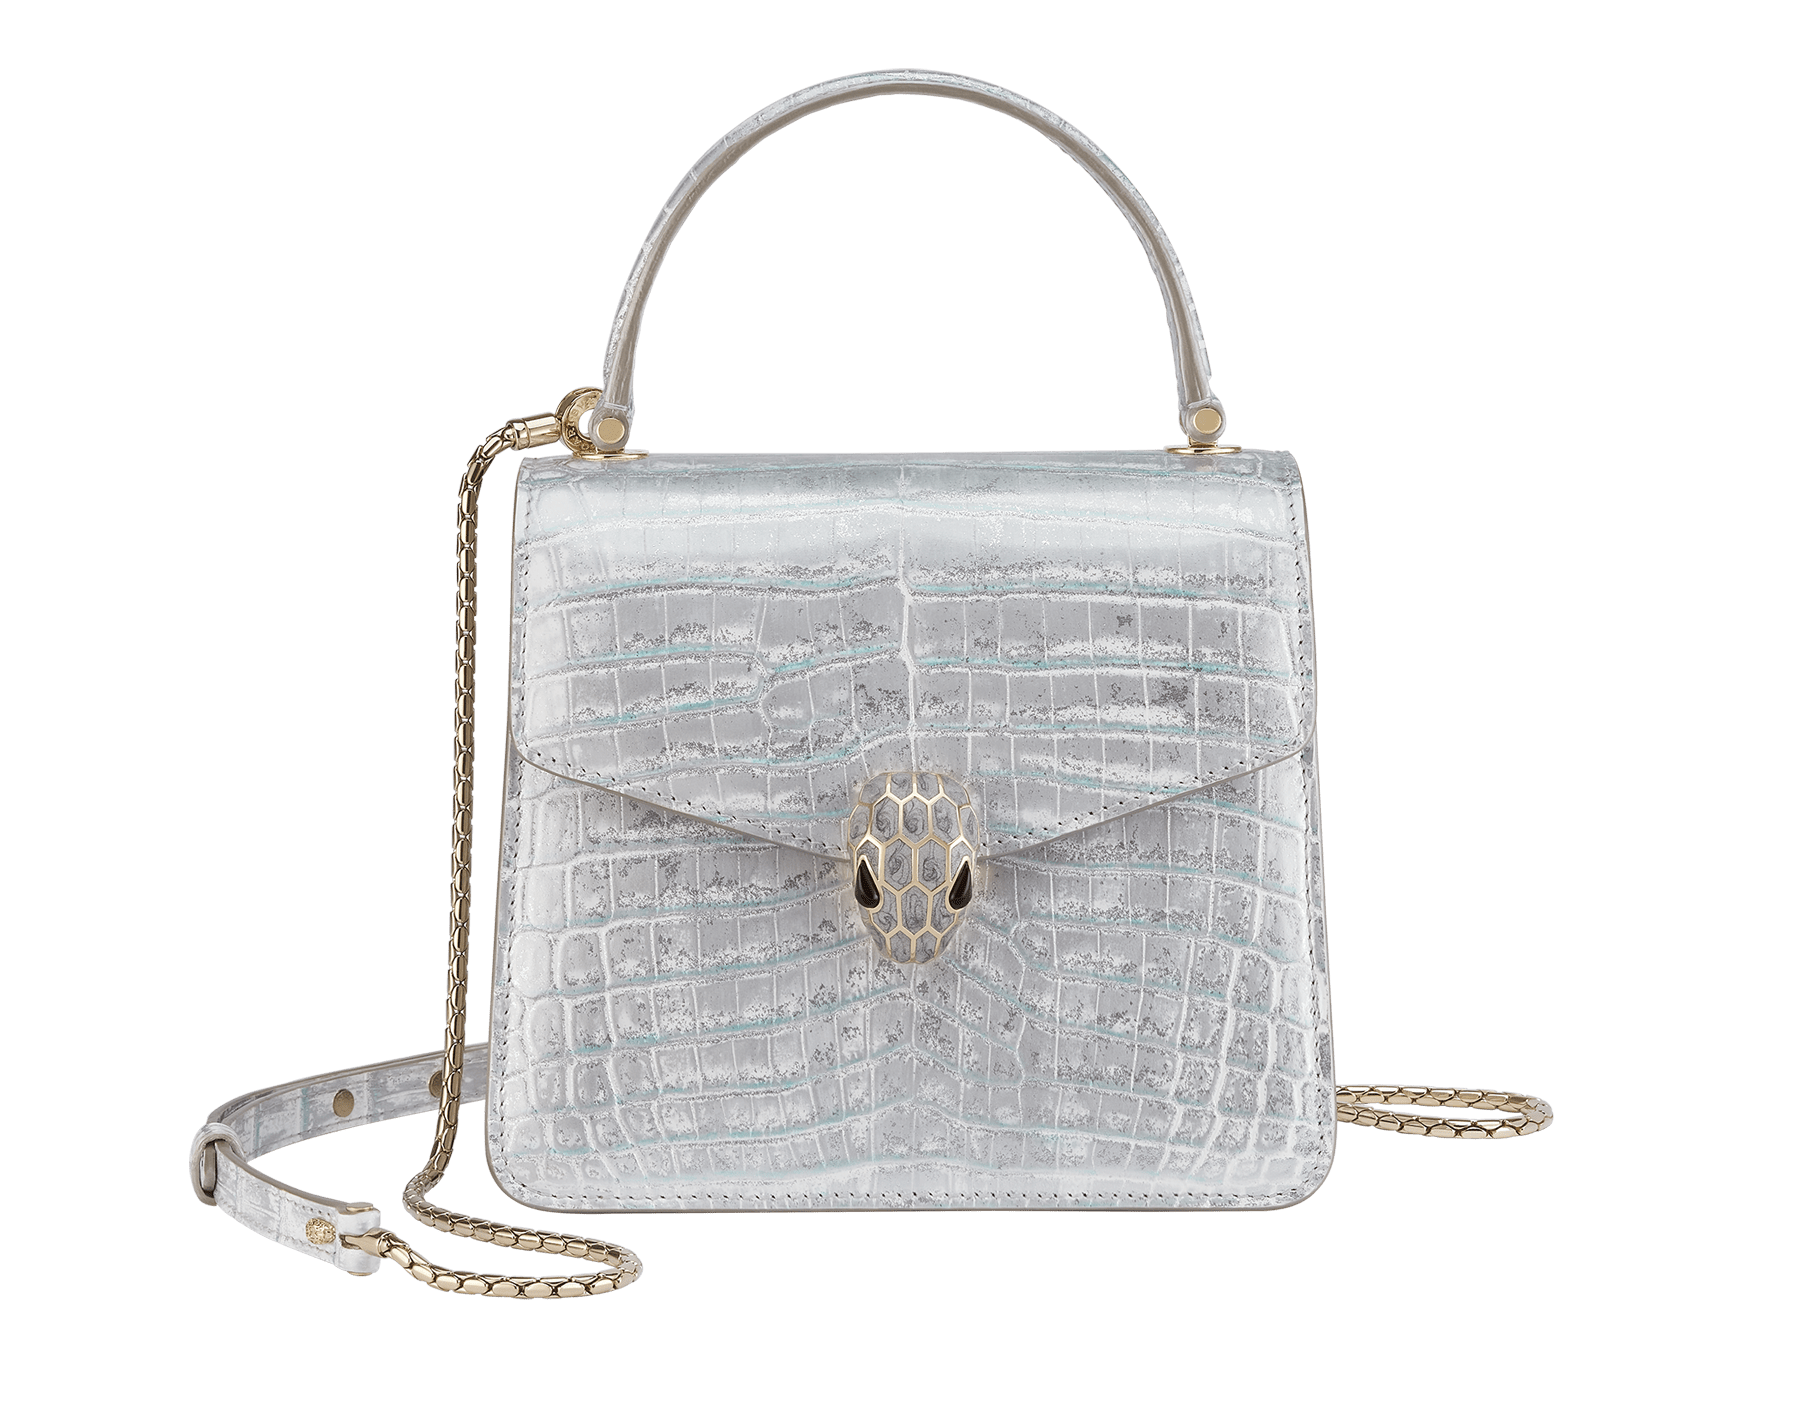 Serpenti Forever small top handle bag in white Snow Crystal crocodile skin with black nappa leather lining. Captivating snakehead press-stud closure in light gold-plated brass embellished with matte silver enamel scales and black onyx eyes. 292926 image 1